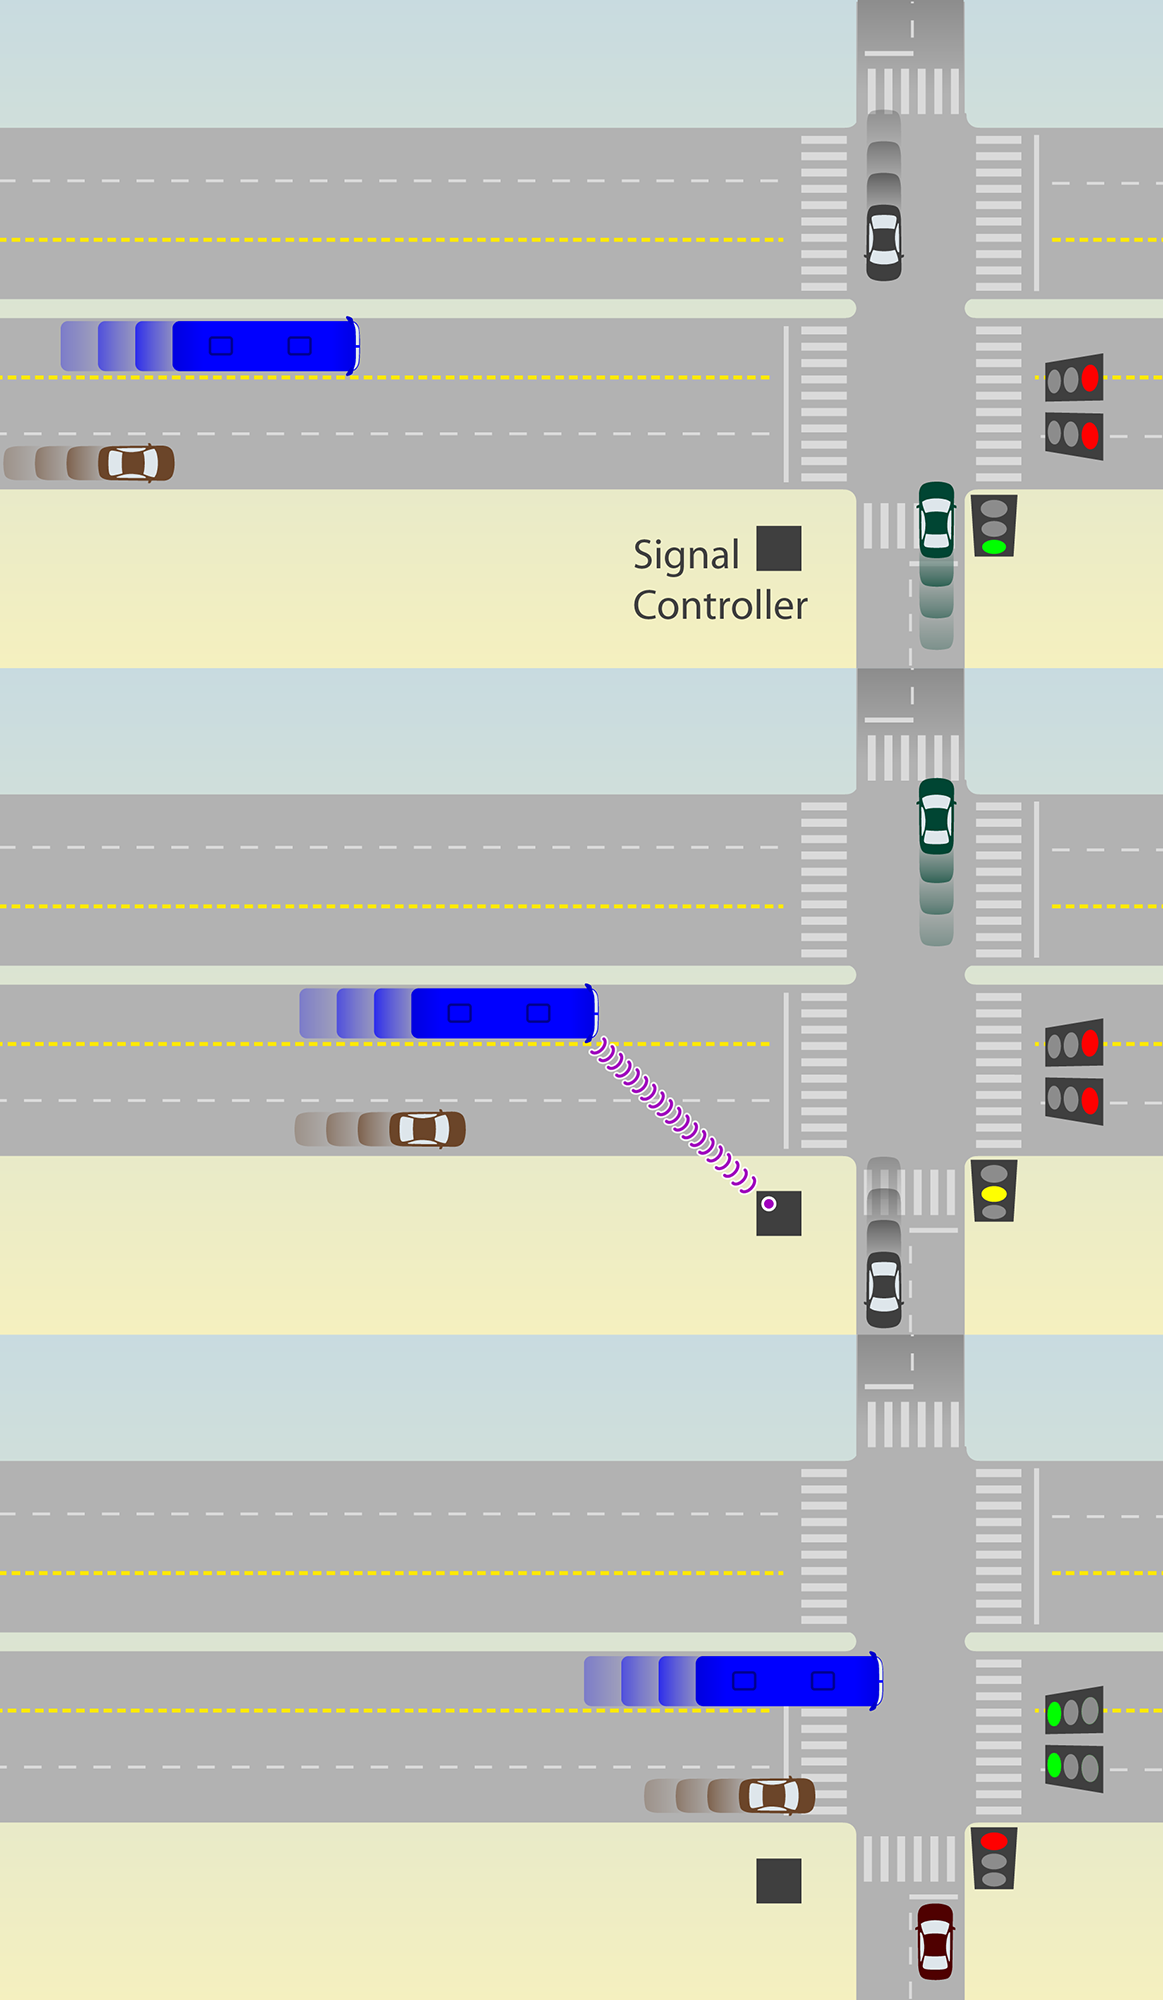 Fig. 24.18 Active priority can reduce red time for the BRT corridor when the BRT vehicle is detected approaching the intersection.